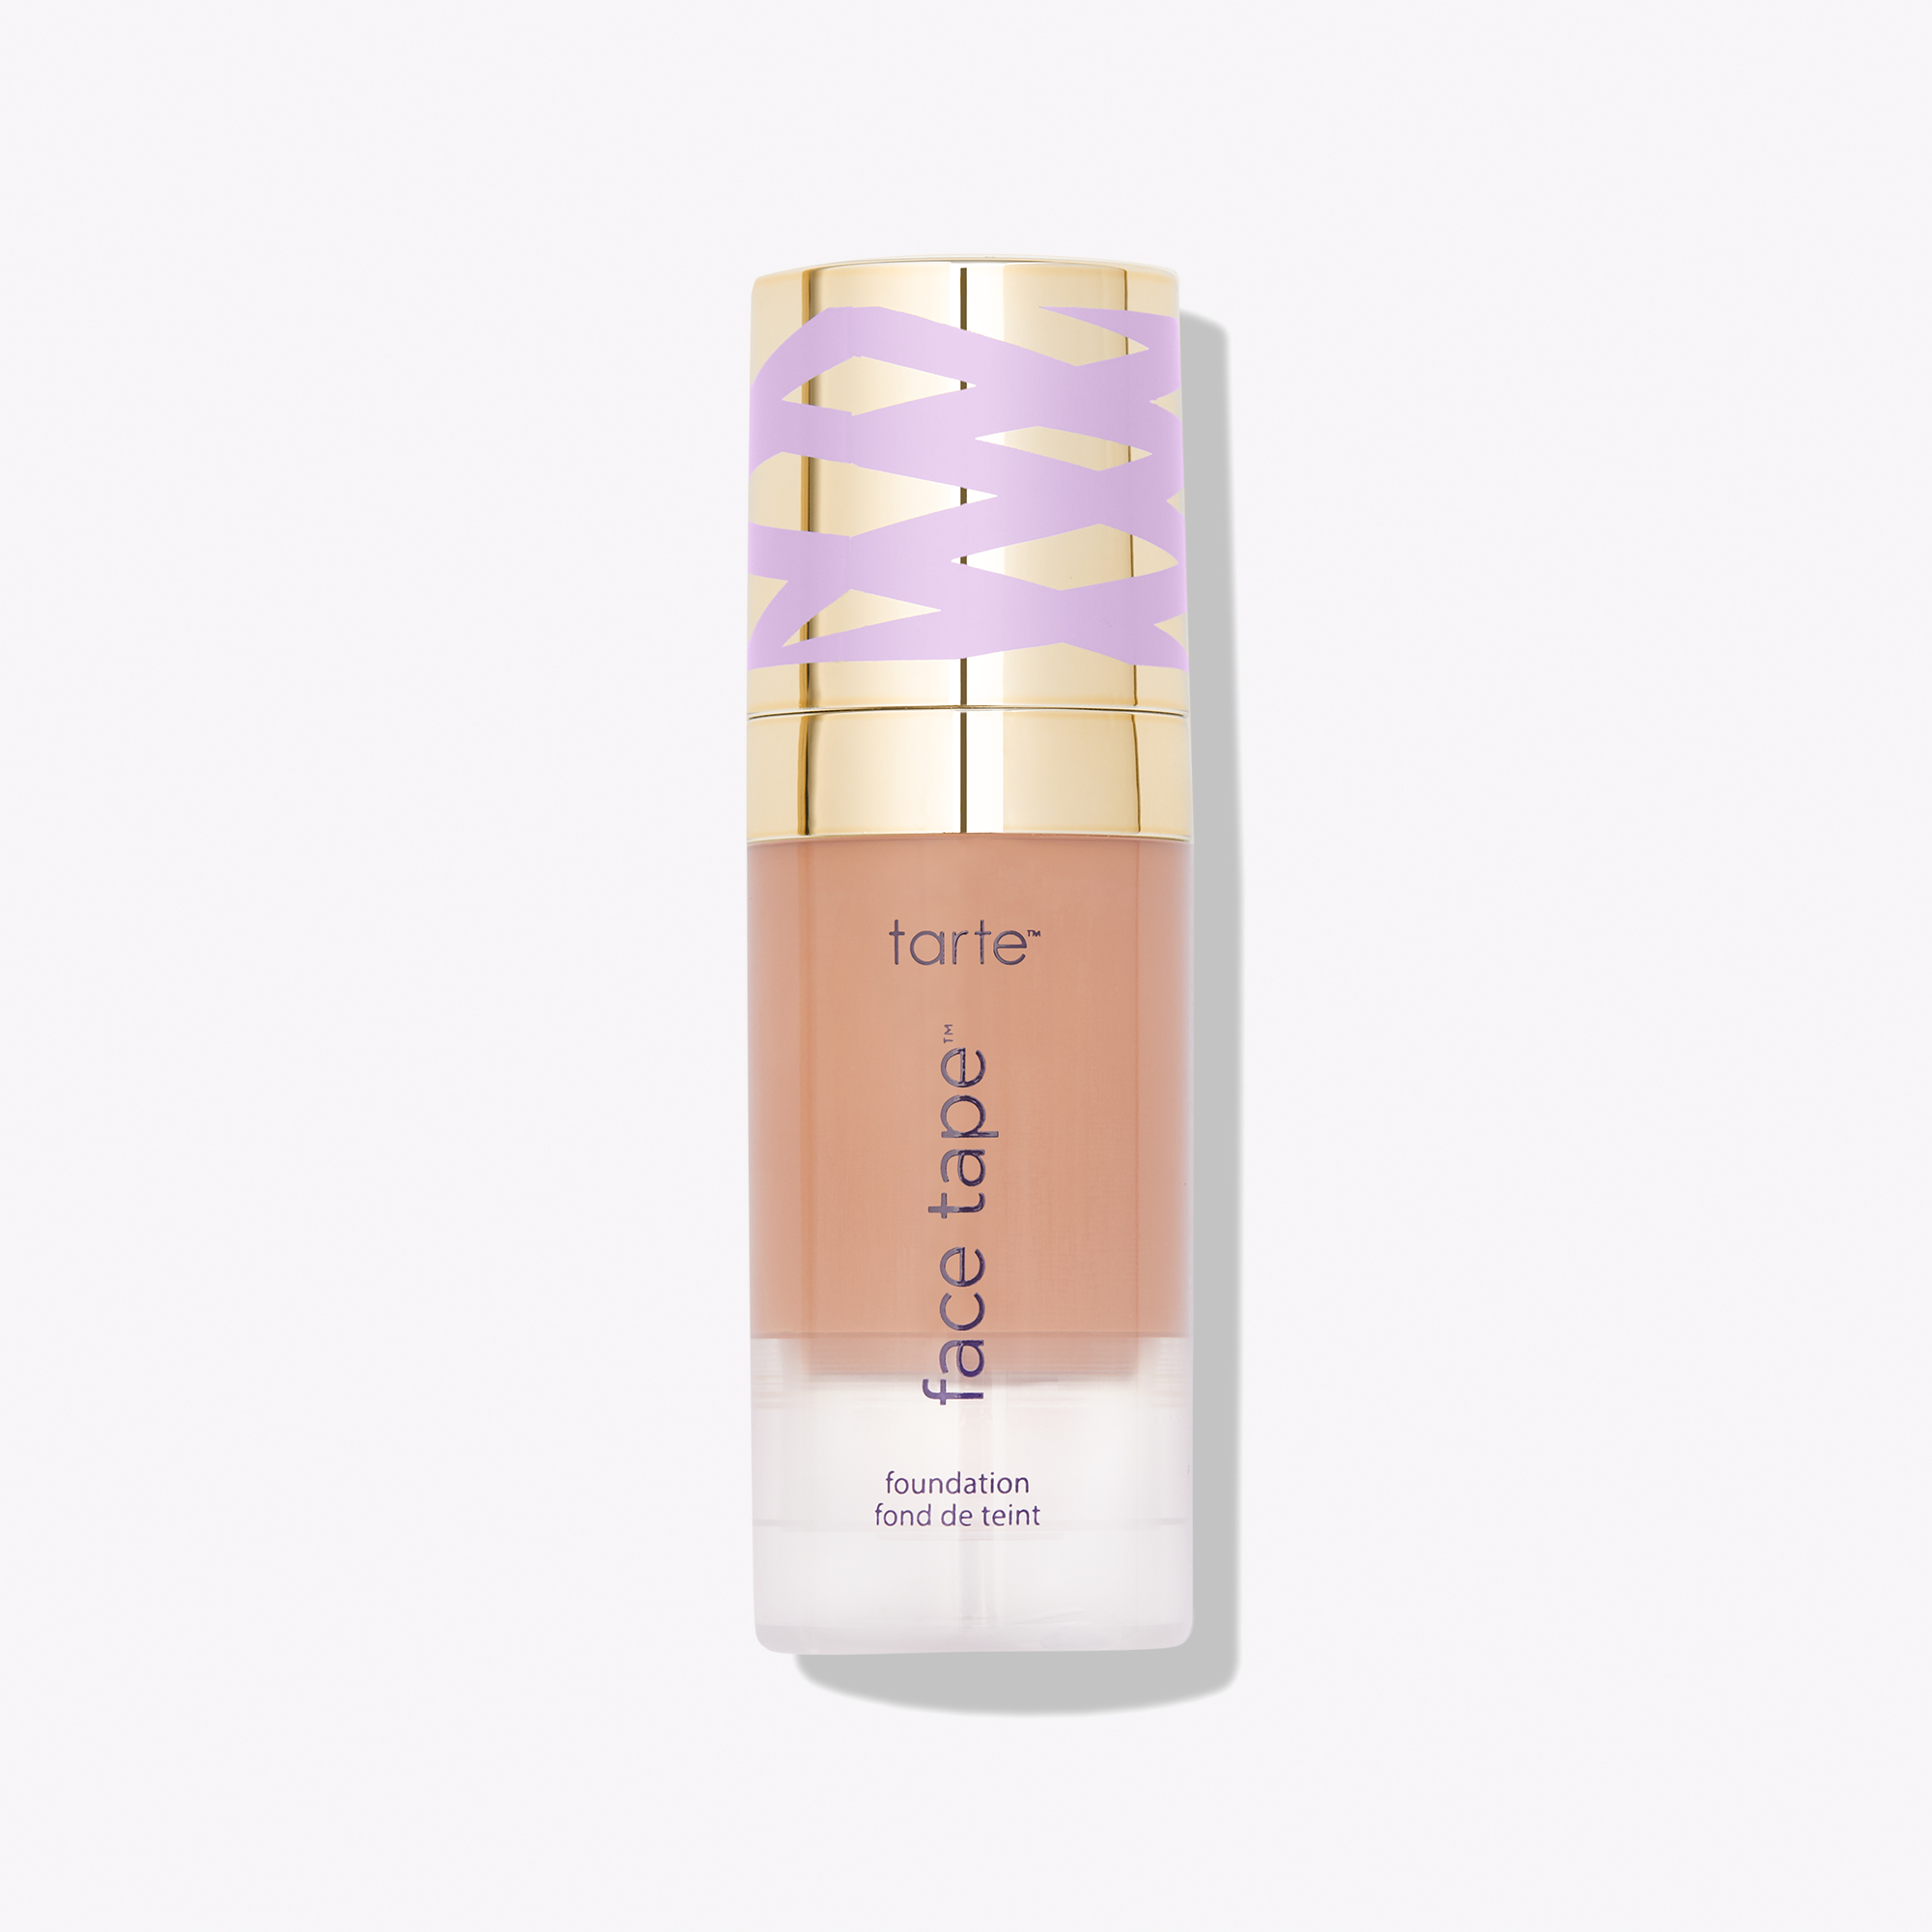 Tarte Cosmetics Travel-size Face Tapeâ?¢ Foundation In White